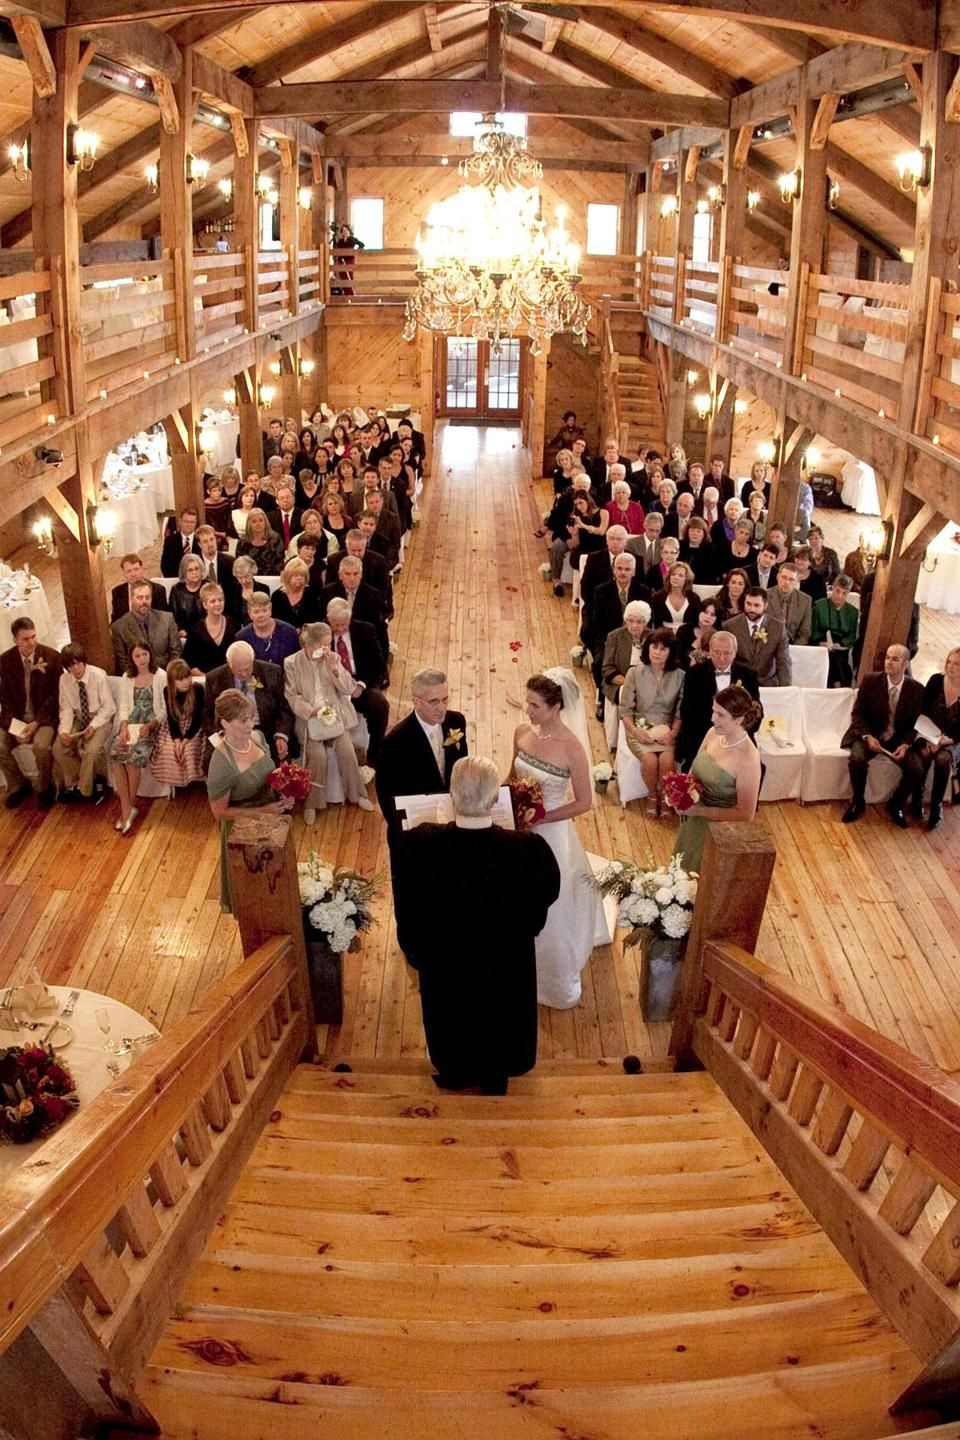 Wedding Venues In Boston
 Wedding reception venues Red Lion Inn Cohasset 781 383